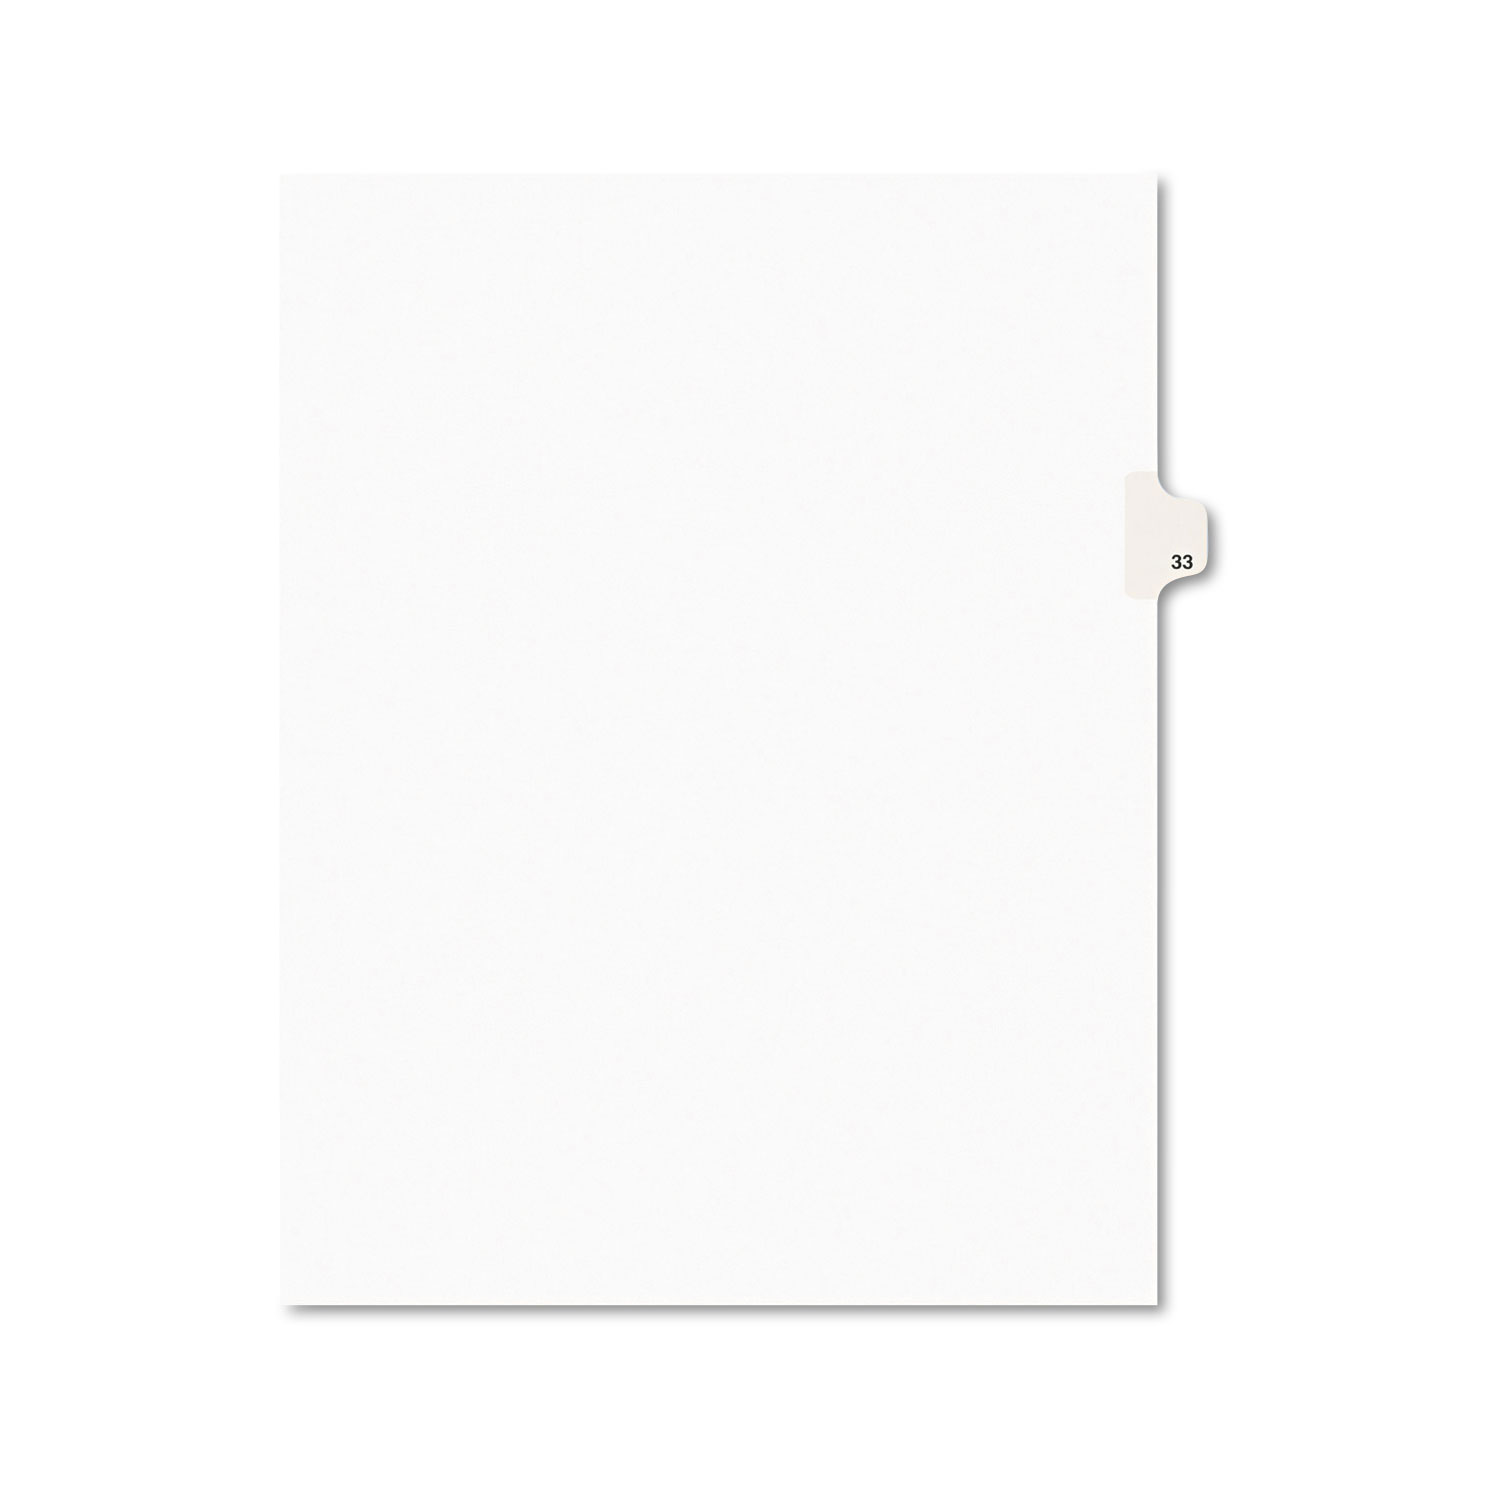  Avery 01033 Preprinted Legal Exhibit Side Tab Index Dividers, Avery Style, 10-Tab, 33, 11 x 8.5, White, 25/Pack (AVE01033) 